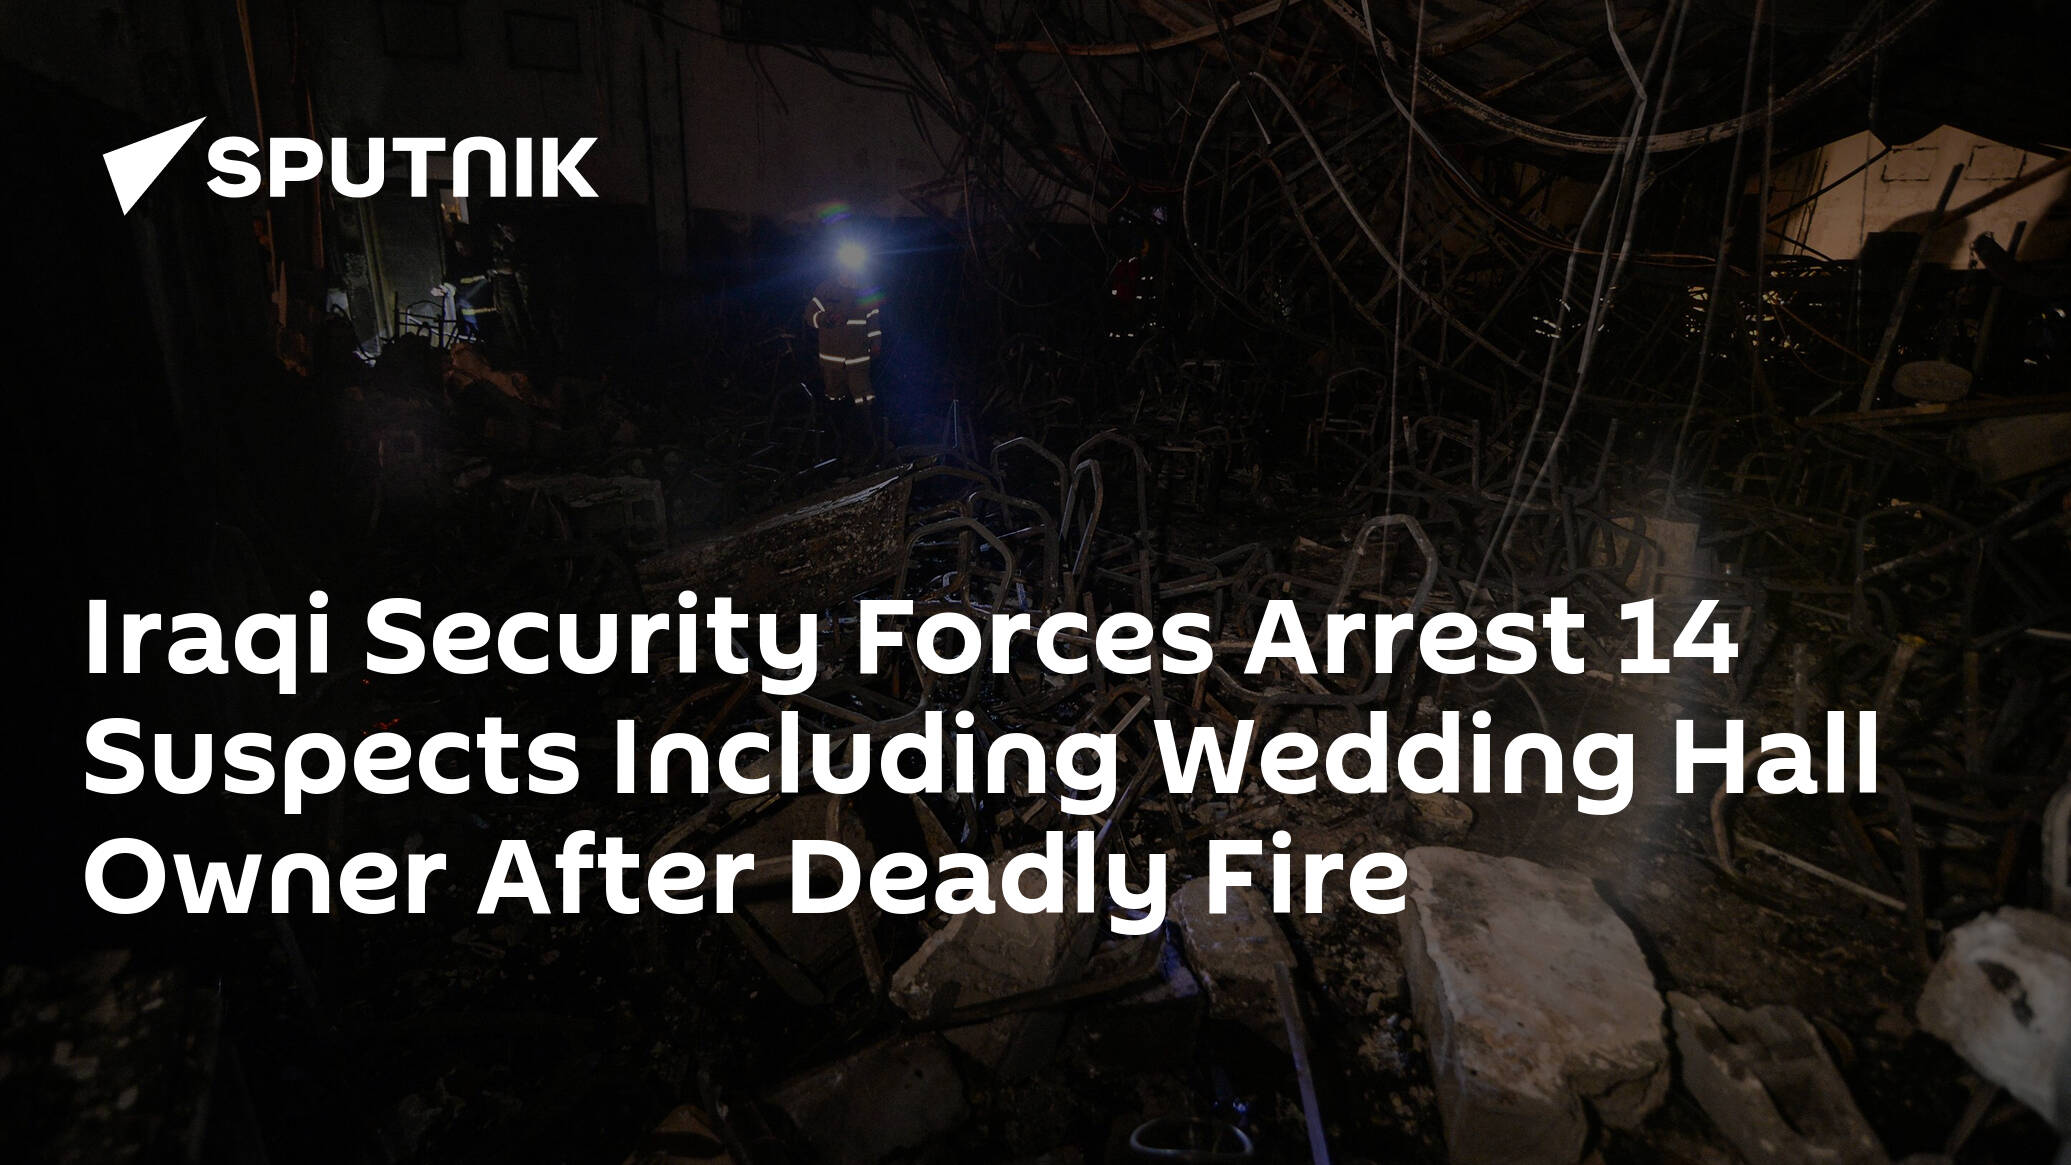 Iraqi Security Forces Arrest 14 Suspects Including Wedding Hall Owner After Deadly Fire